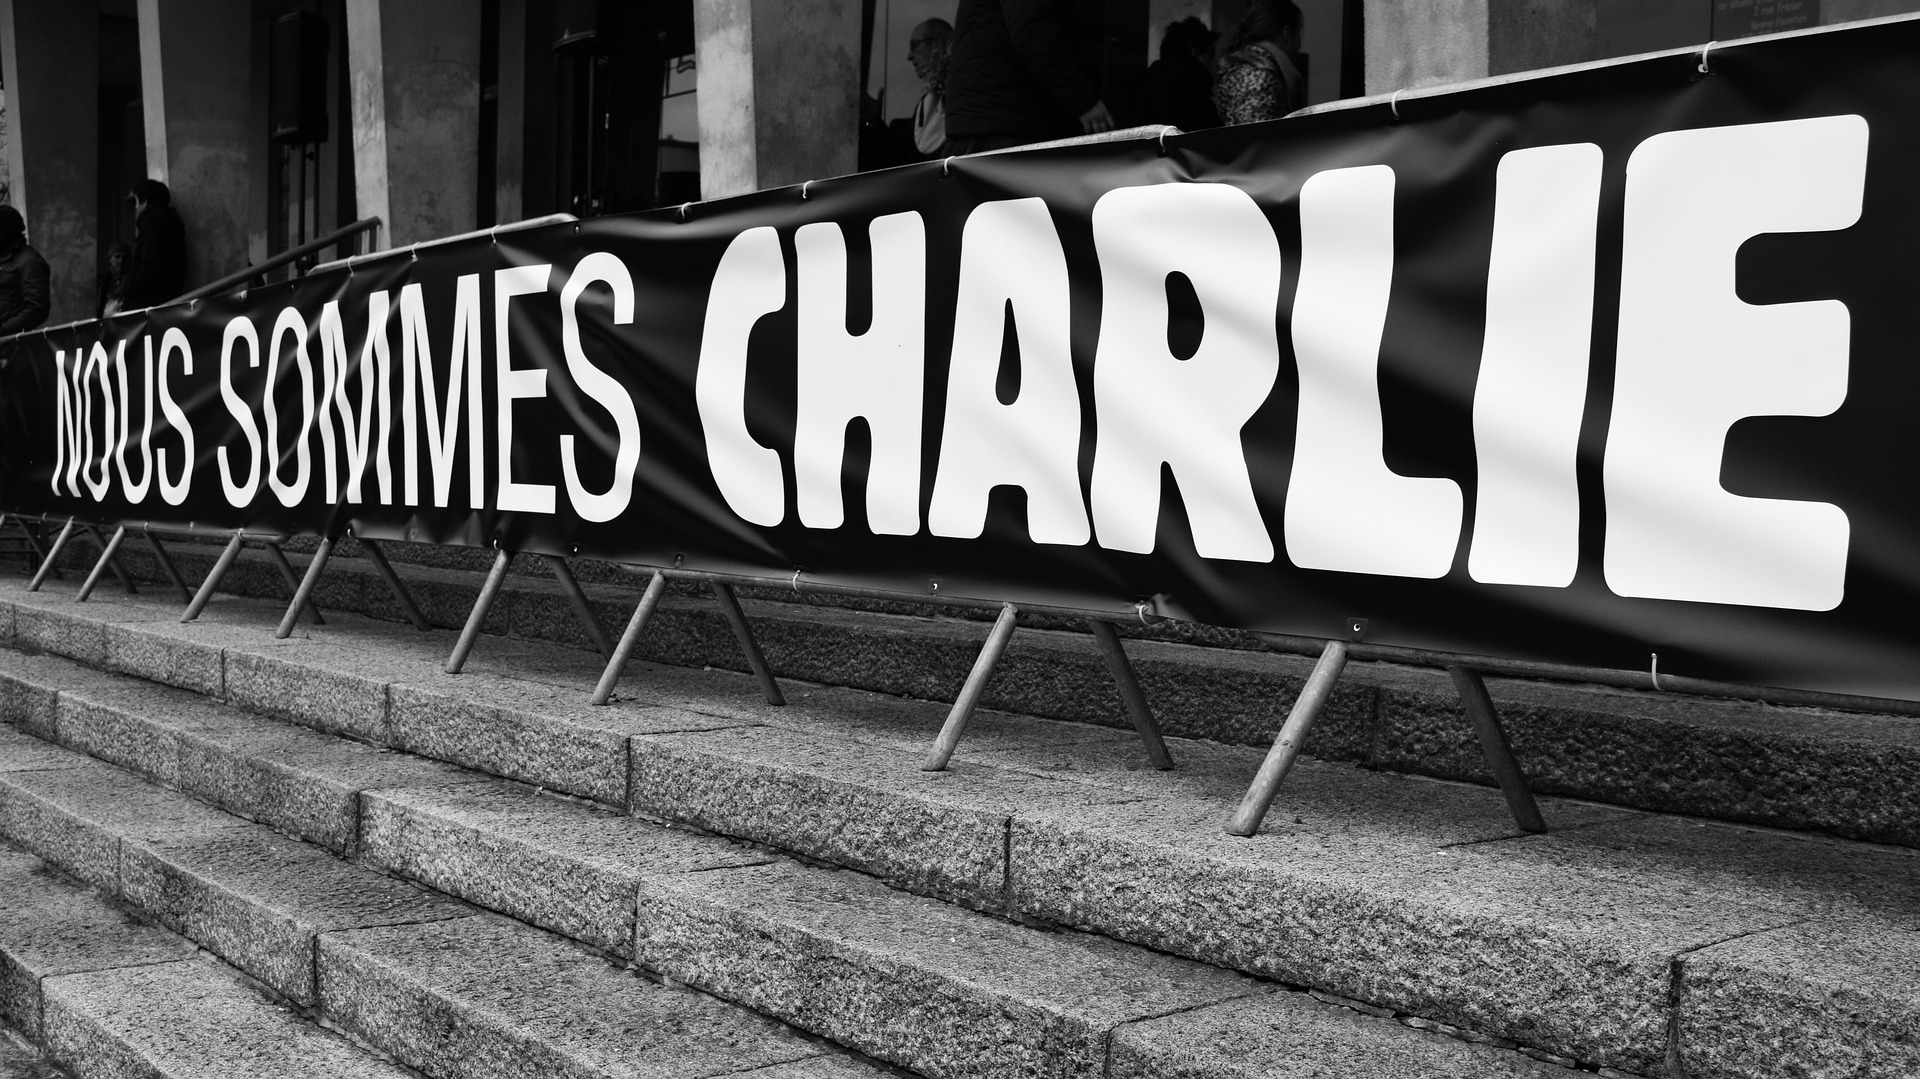 nous sommes charlie